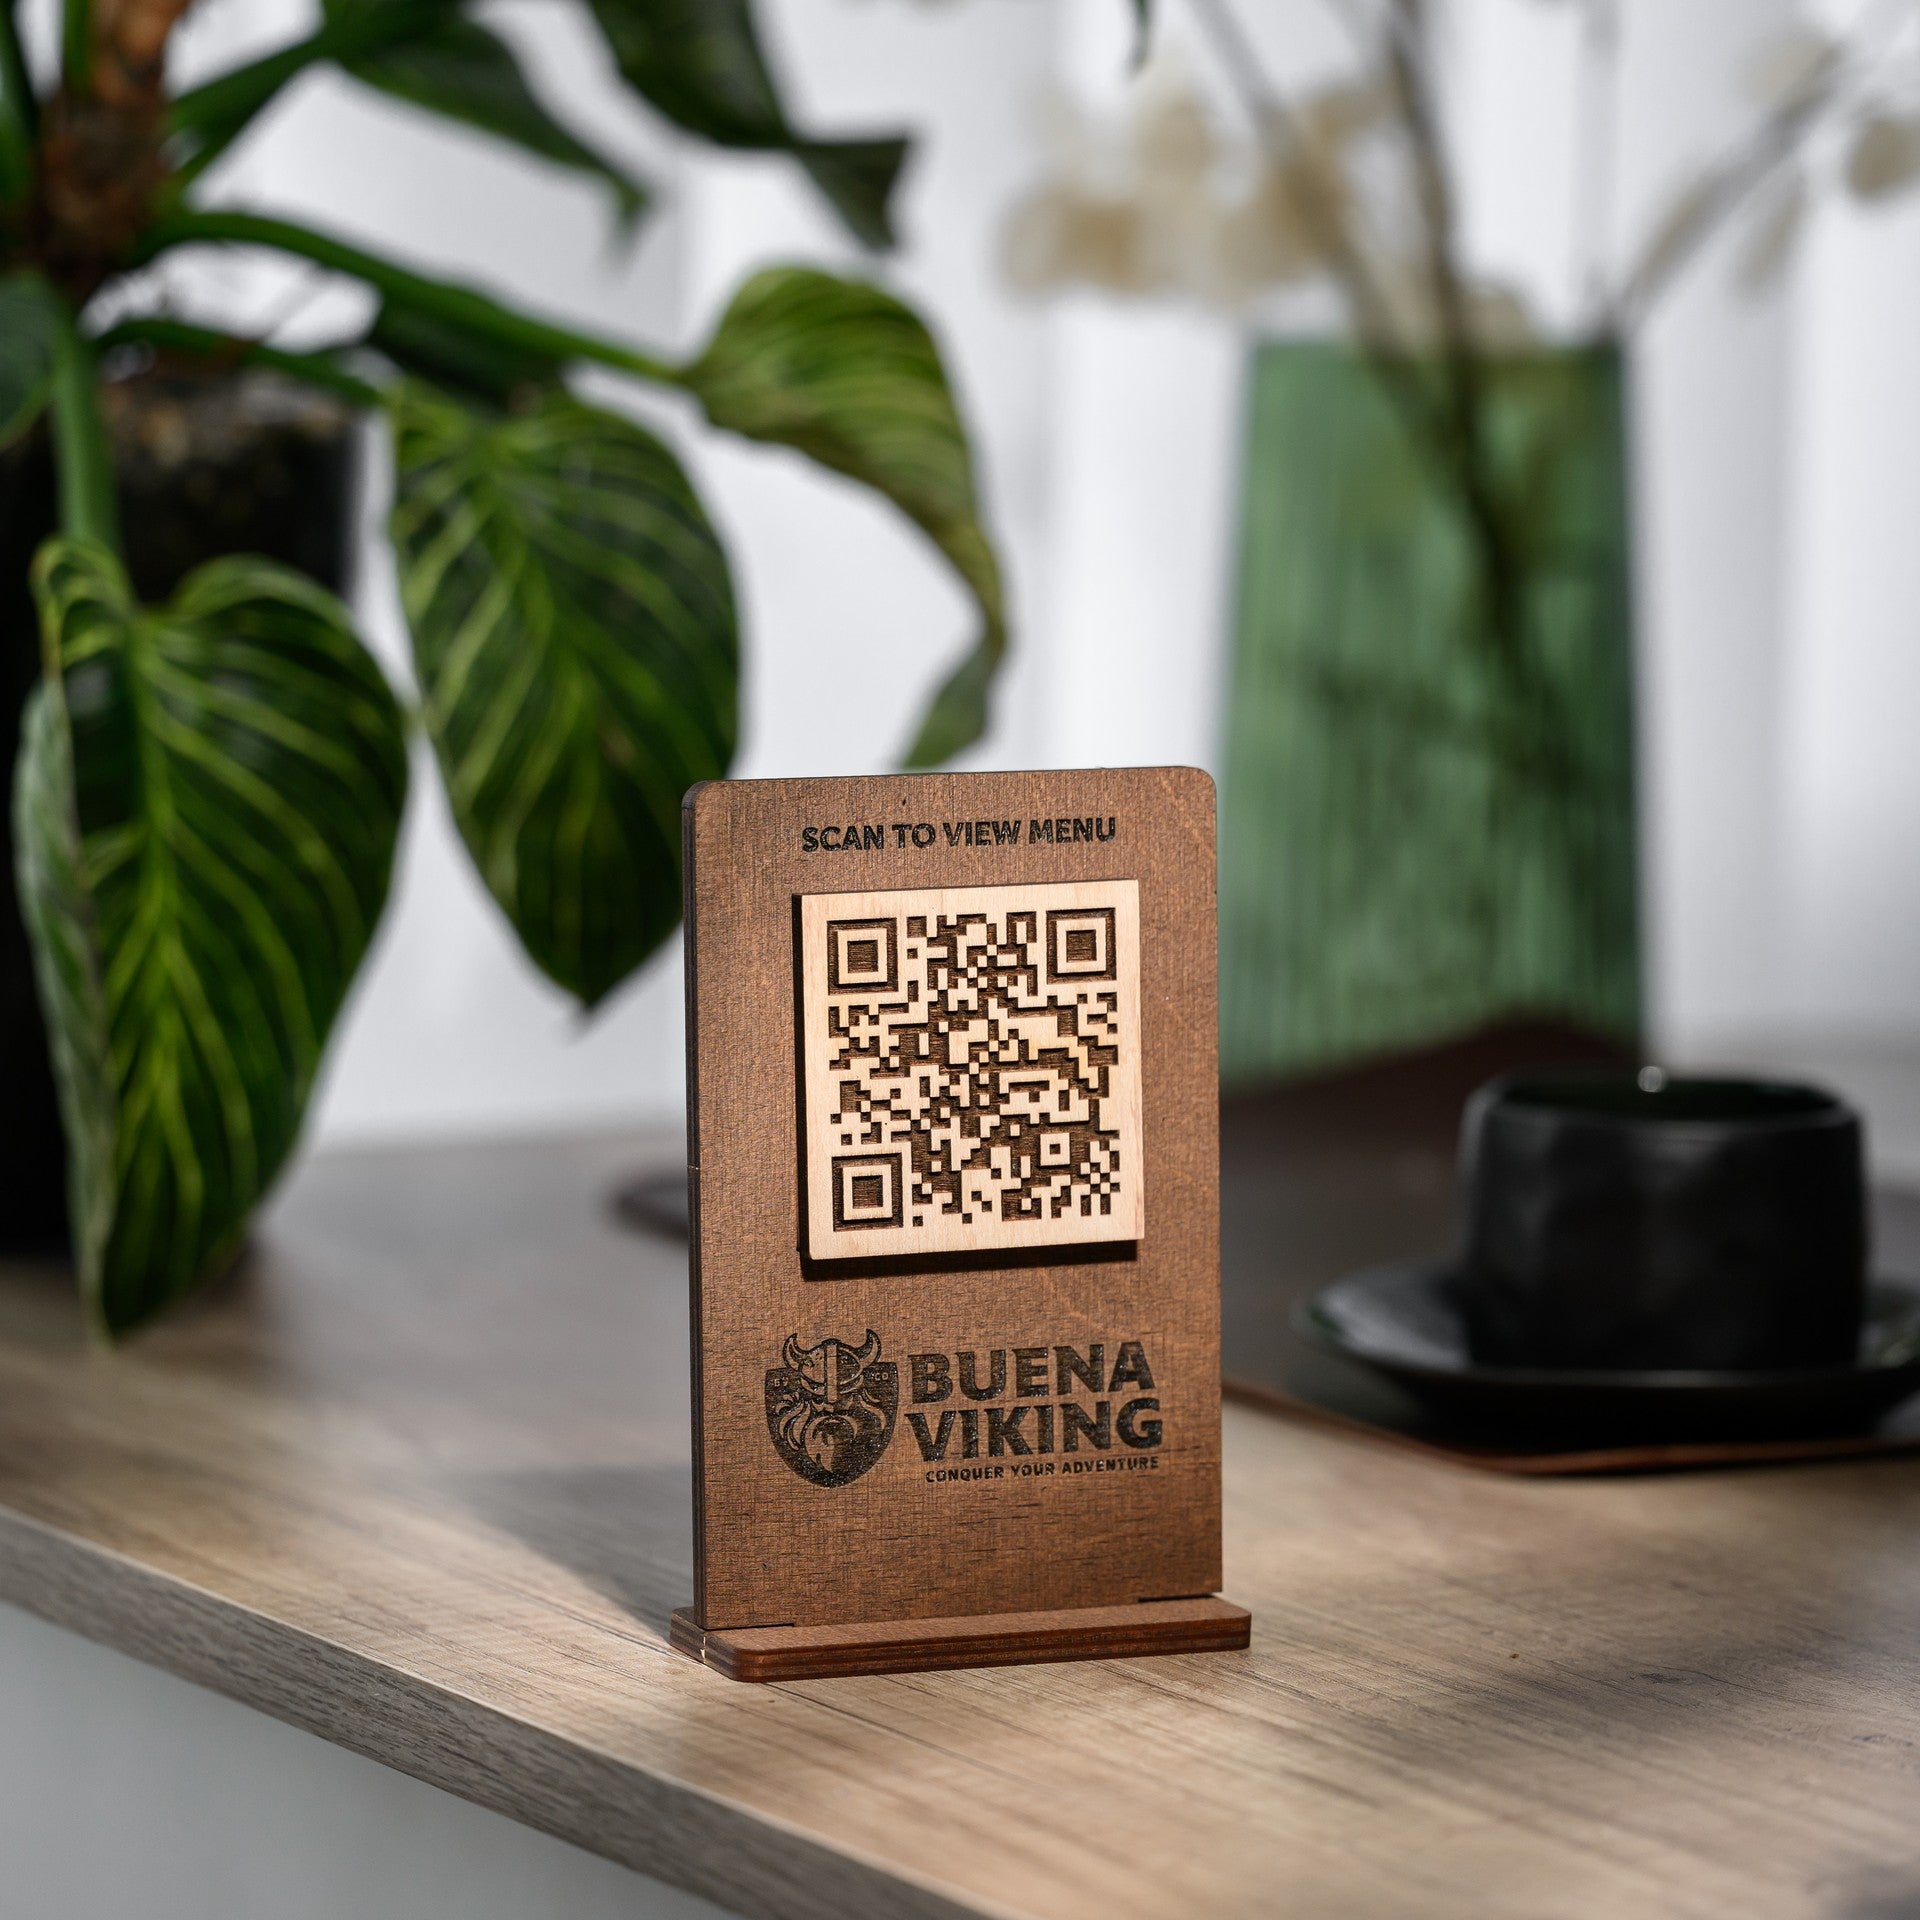 Bar Menu Display with a touchless QR code. Enhance customer experience with a scannable price list and menu.